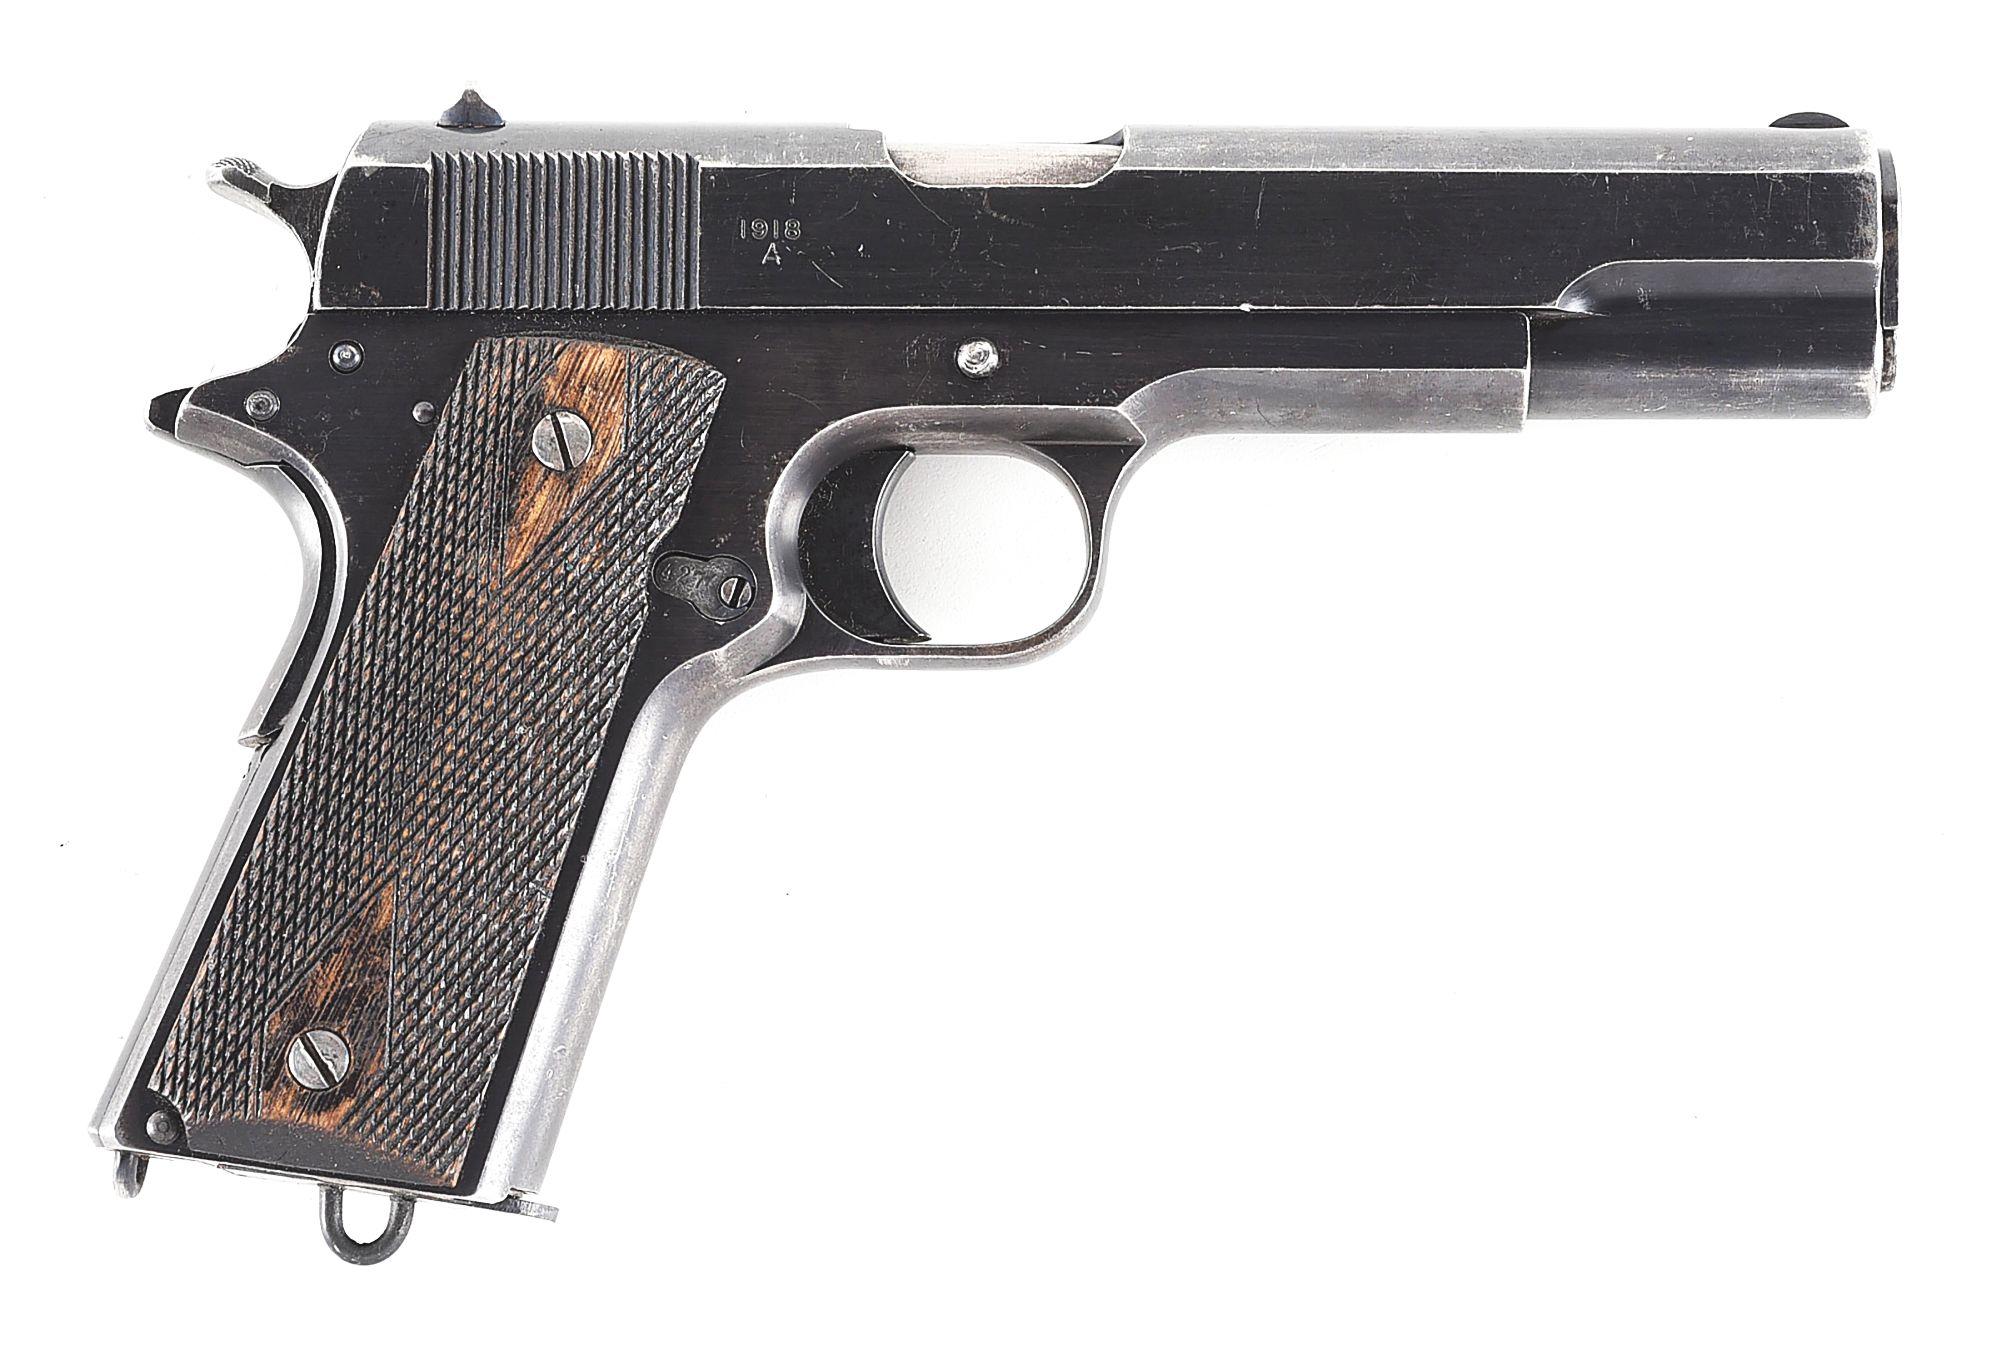 (C) EARLY KONGSBERG MODEL 1914 SEMI AUTOMATIC PISTOL WITH ORIGINAL ACCESSORIES.